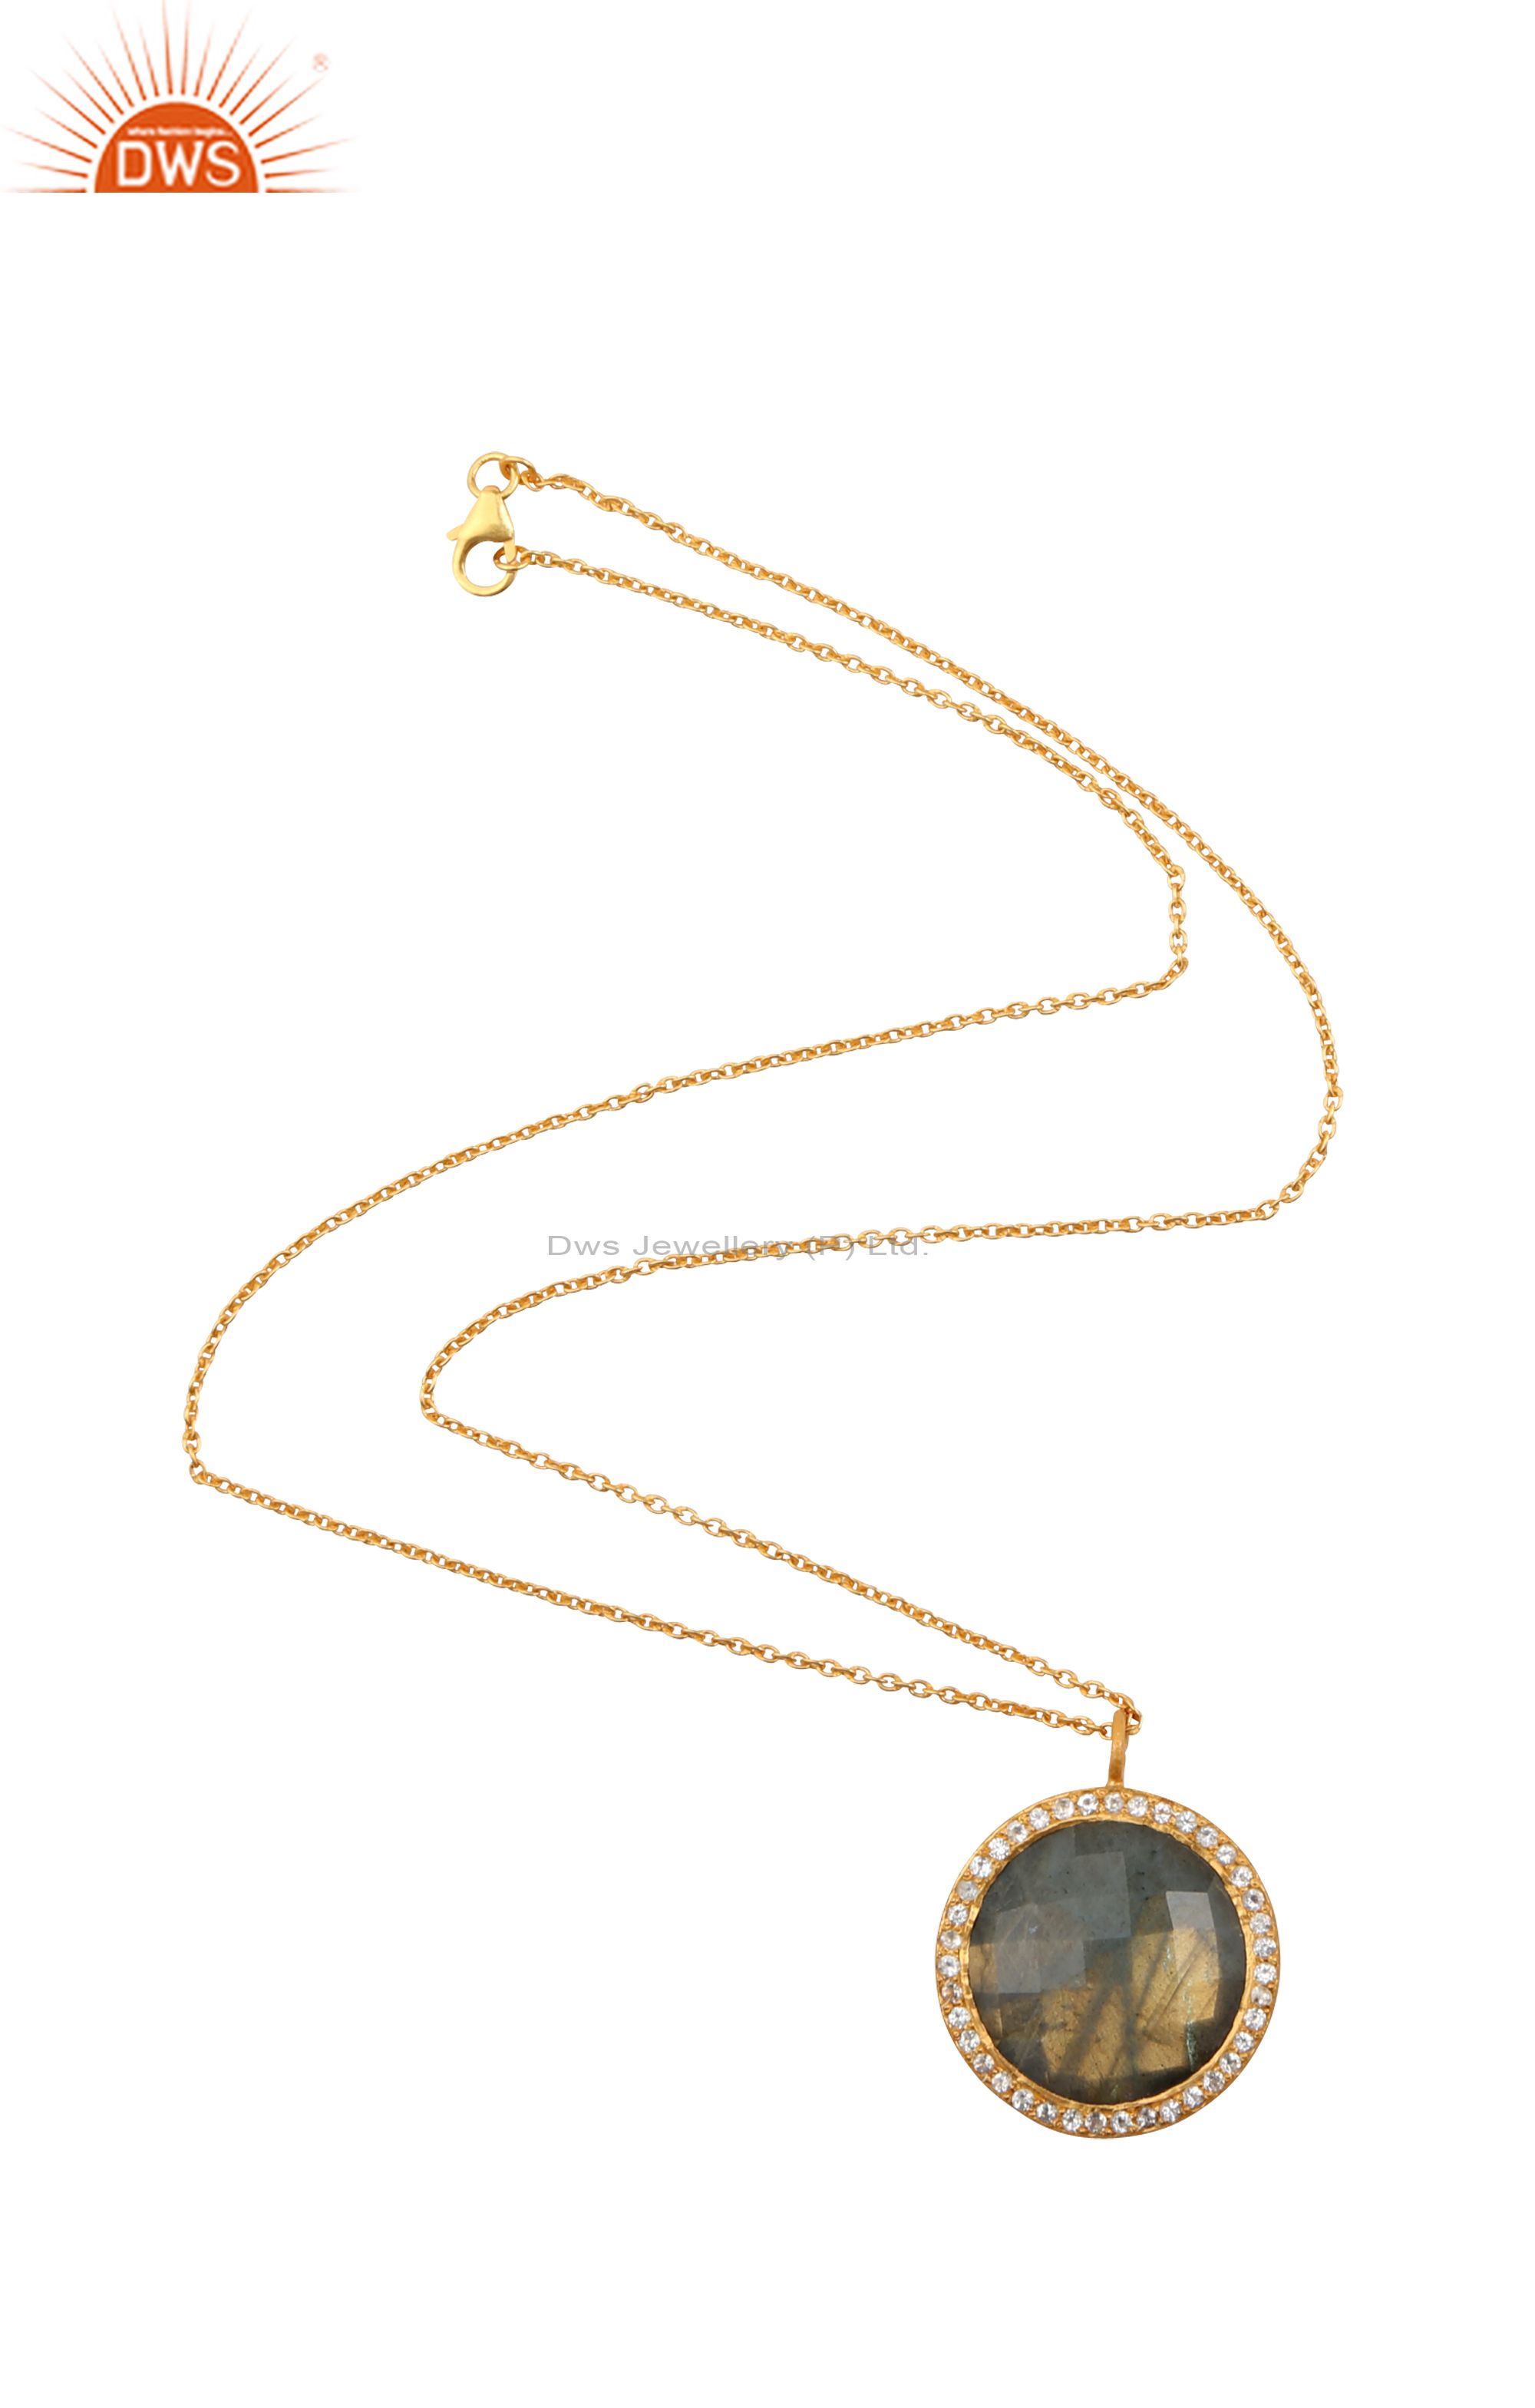 18k yellow gold plated silver labradorite and white topaz pendant with chain